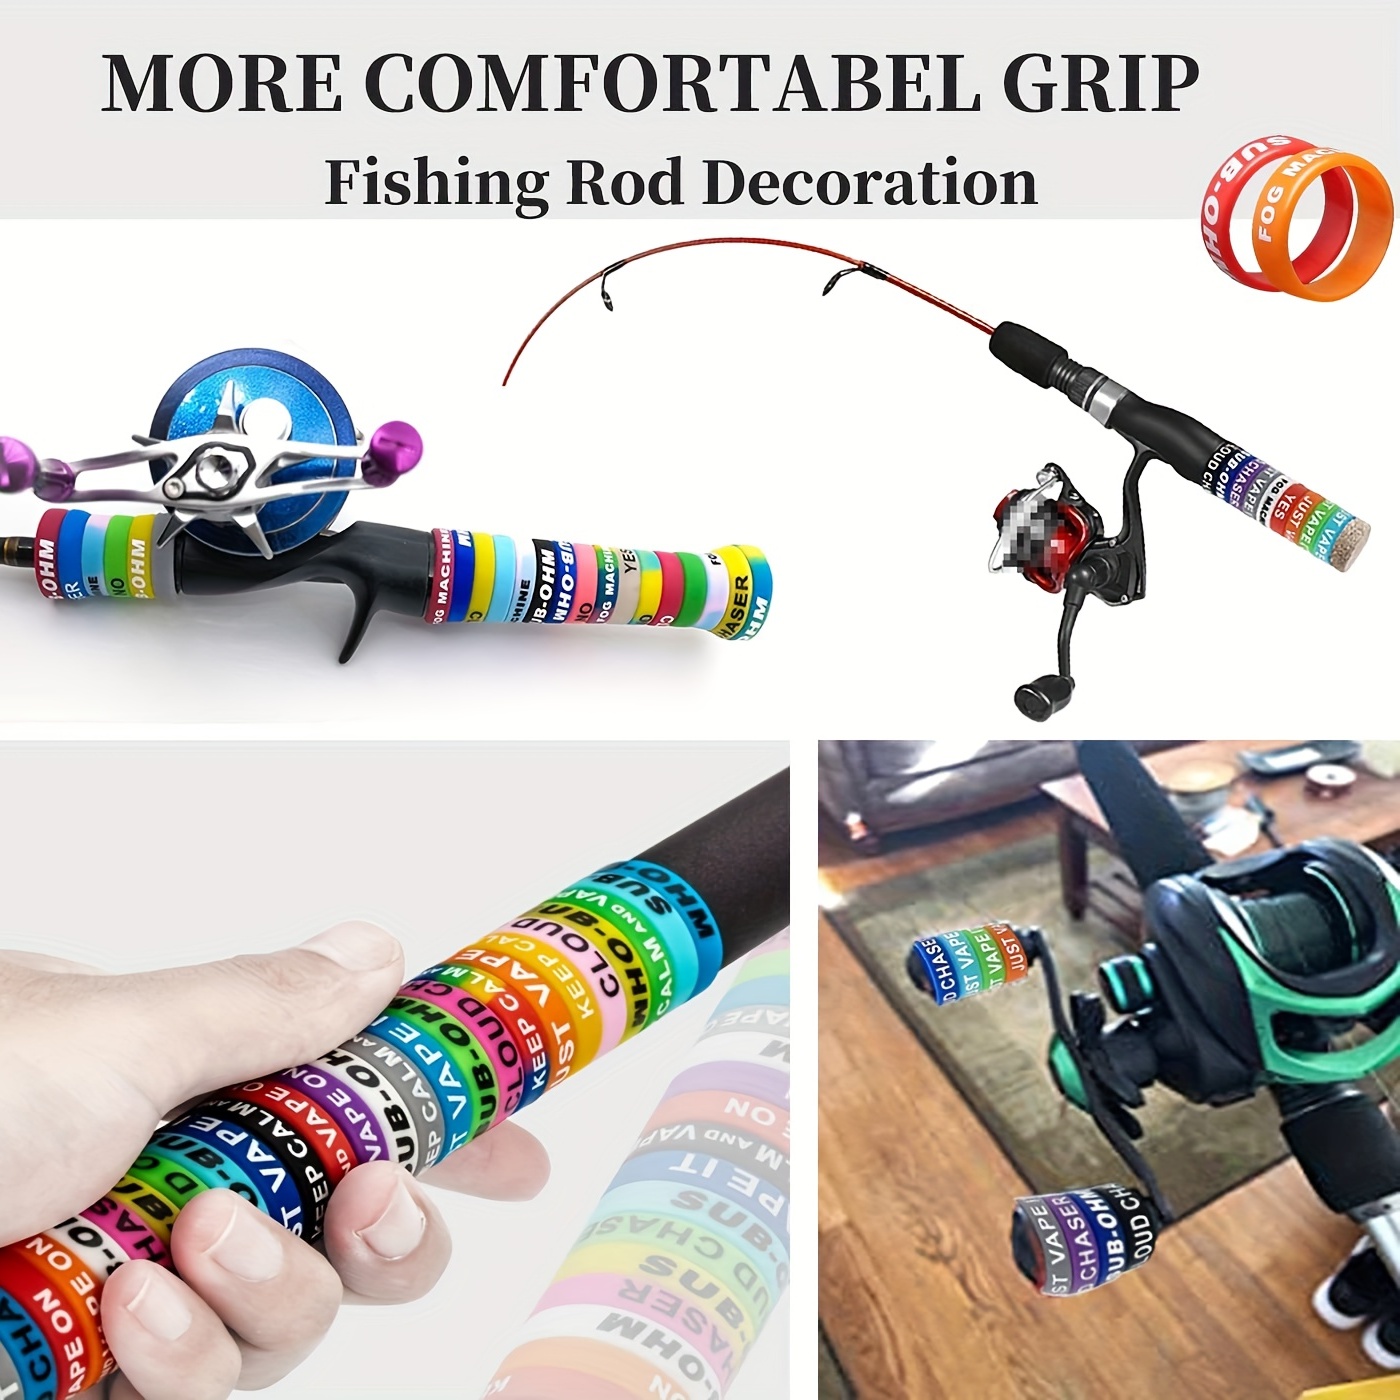 10pcs Non-Slip Fishing Rod Handle Grip with Rubber Ring - Cool Decoration  for Baitcaster Reels (Random Color Mix)